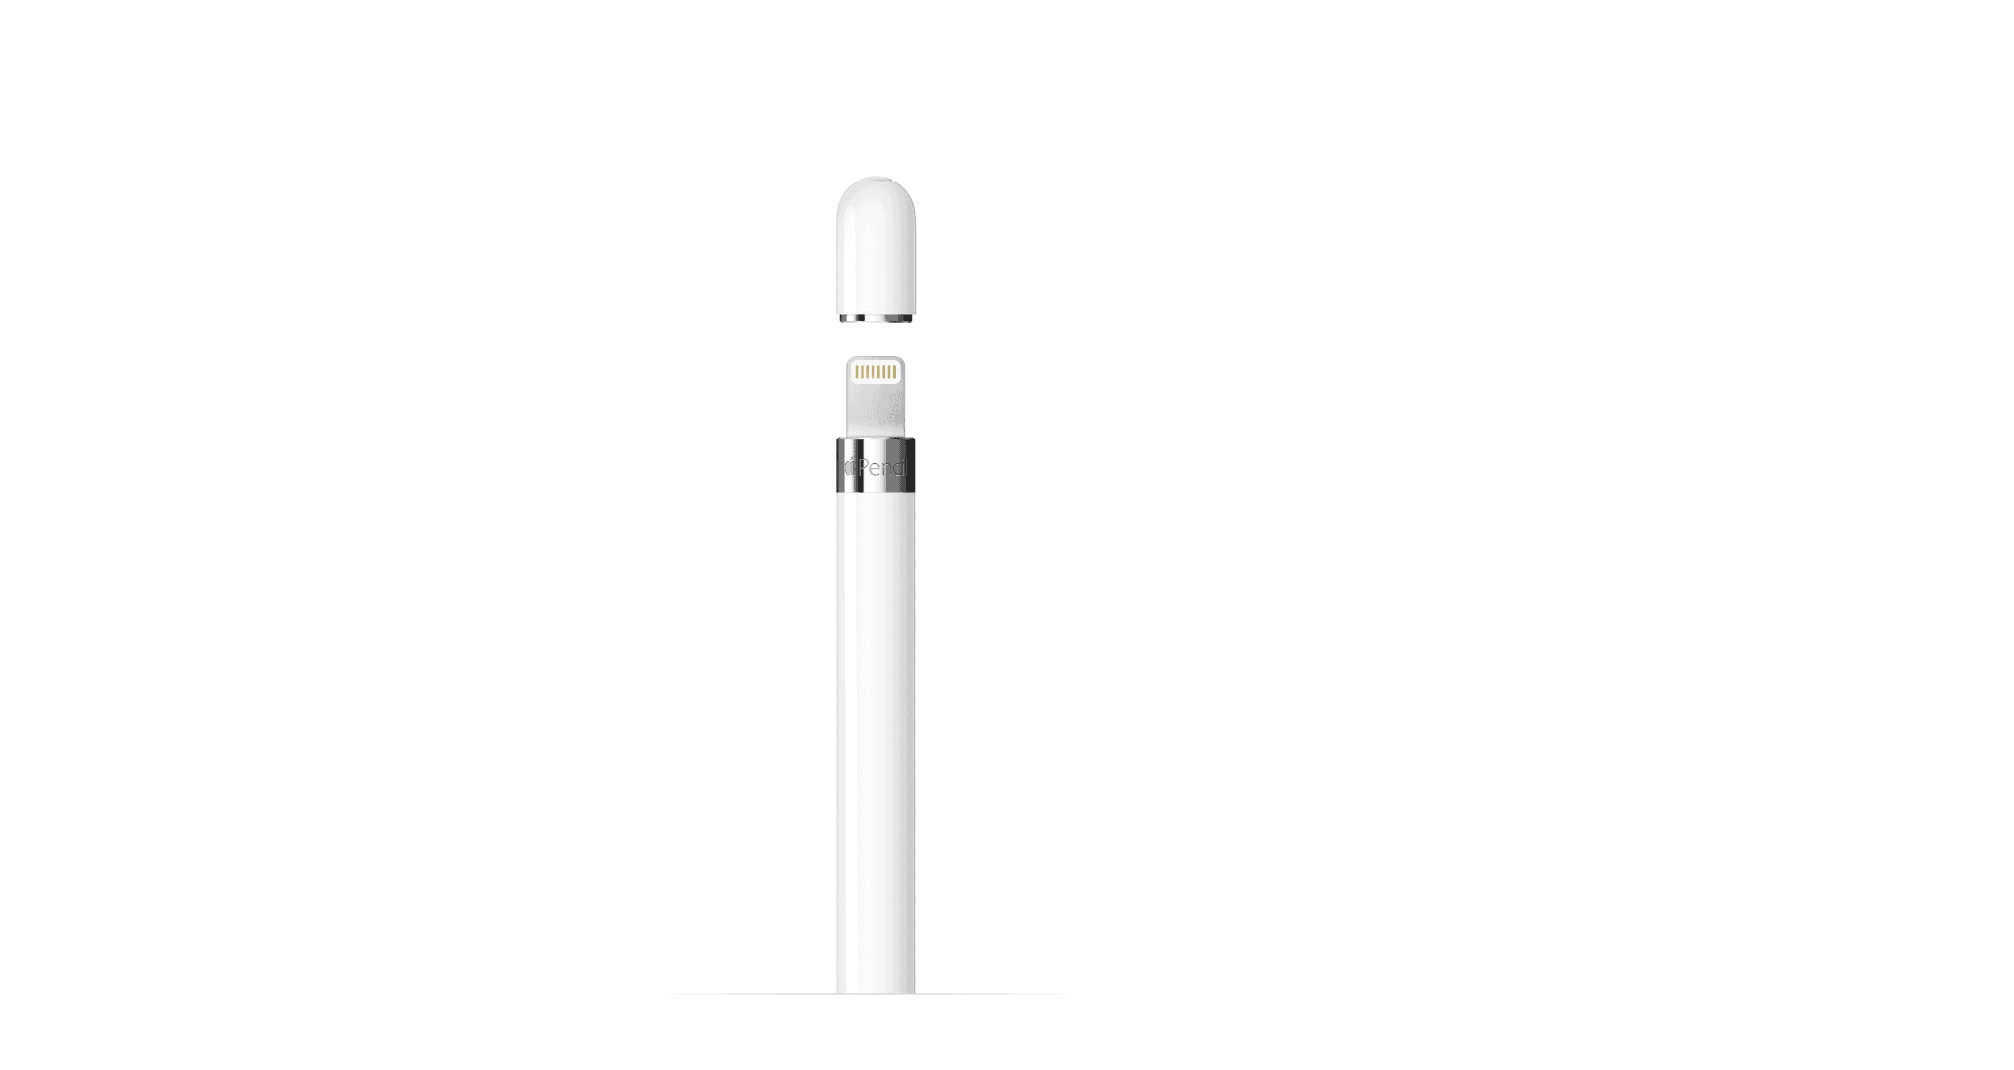 charger on the apple pencil 1st gen